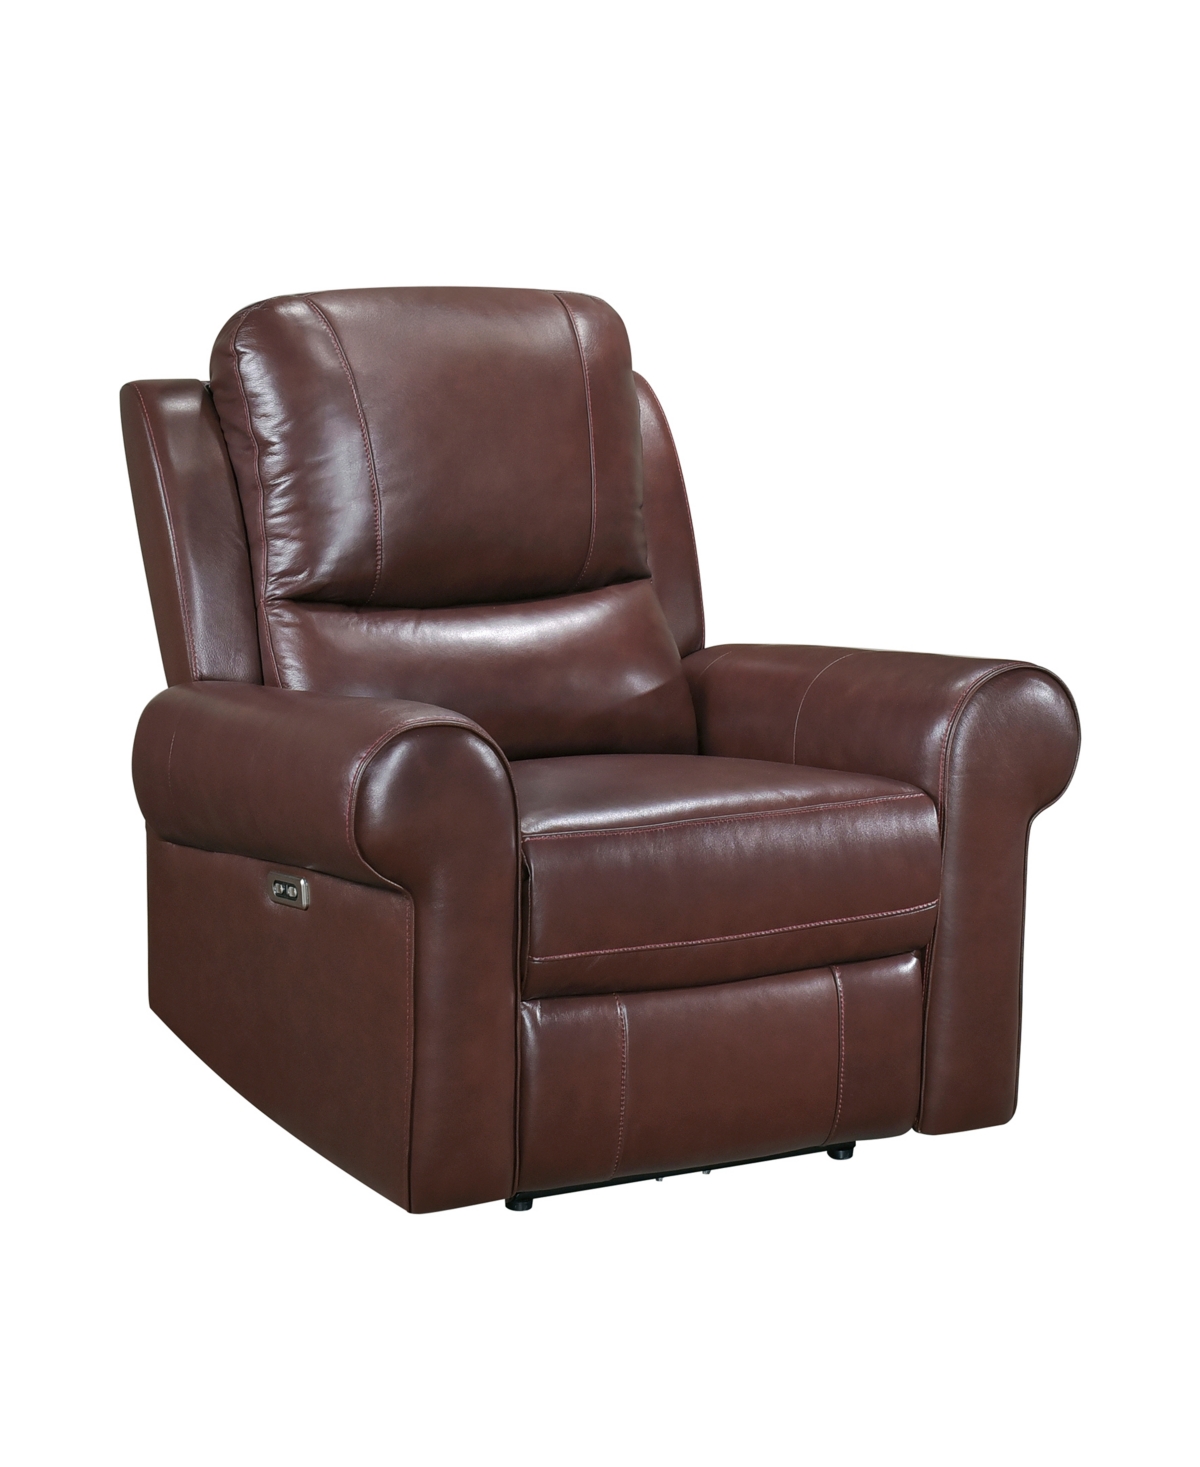 Homelegance White Label Florentina 39" Leather Match Power With Power Headrest Reclining Chair In Brown